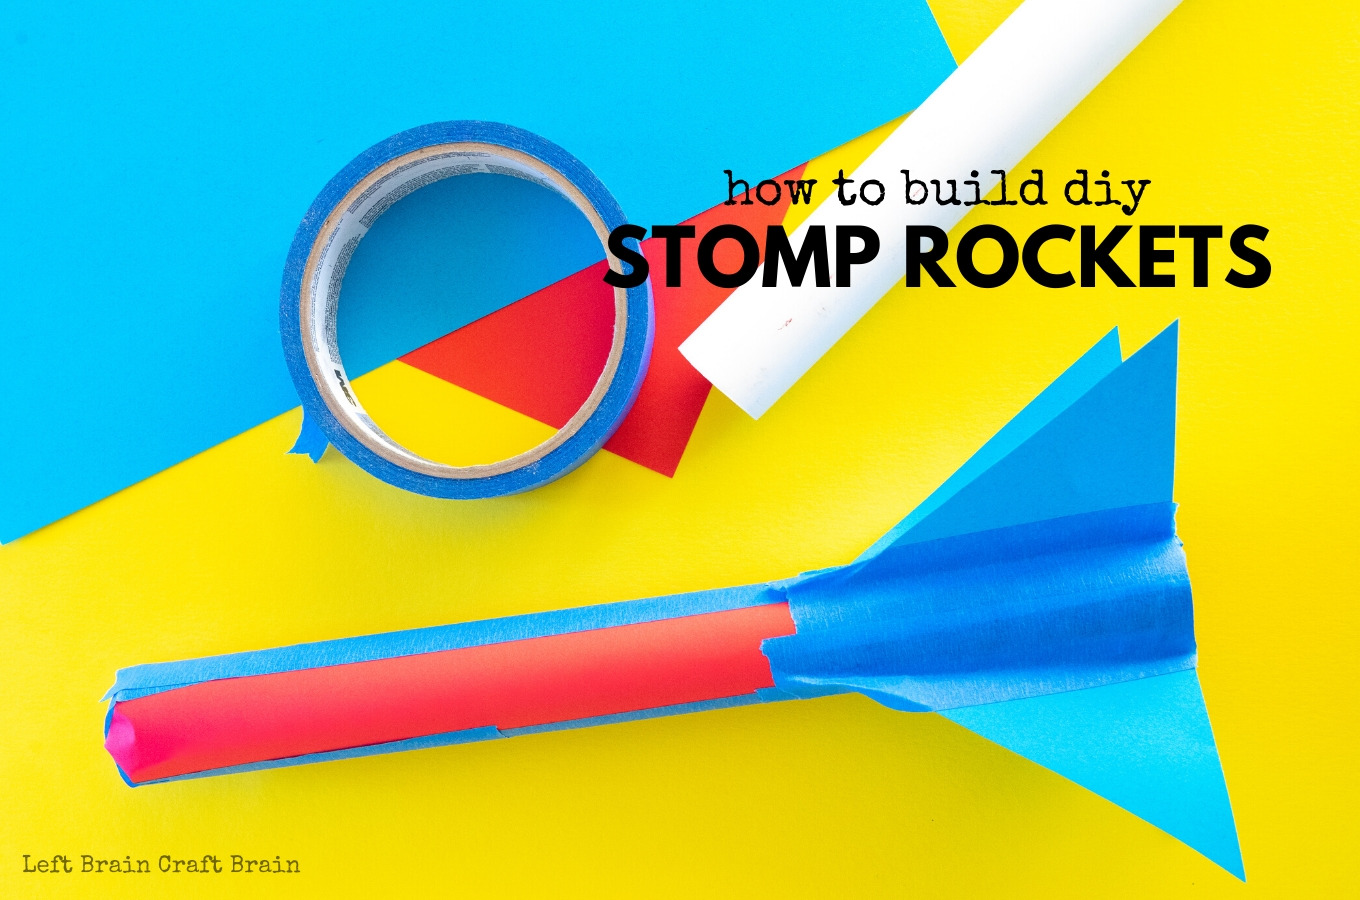 How to build DIY stomp rockets with PVC pipe, 2L bottles, paper, and tape